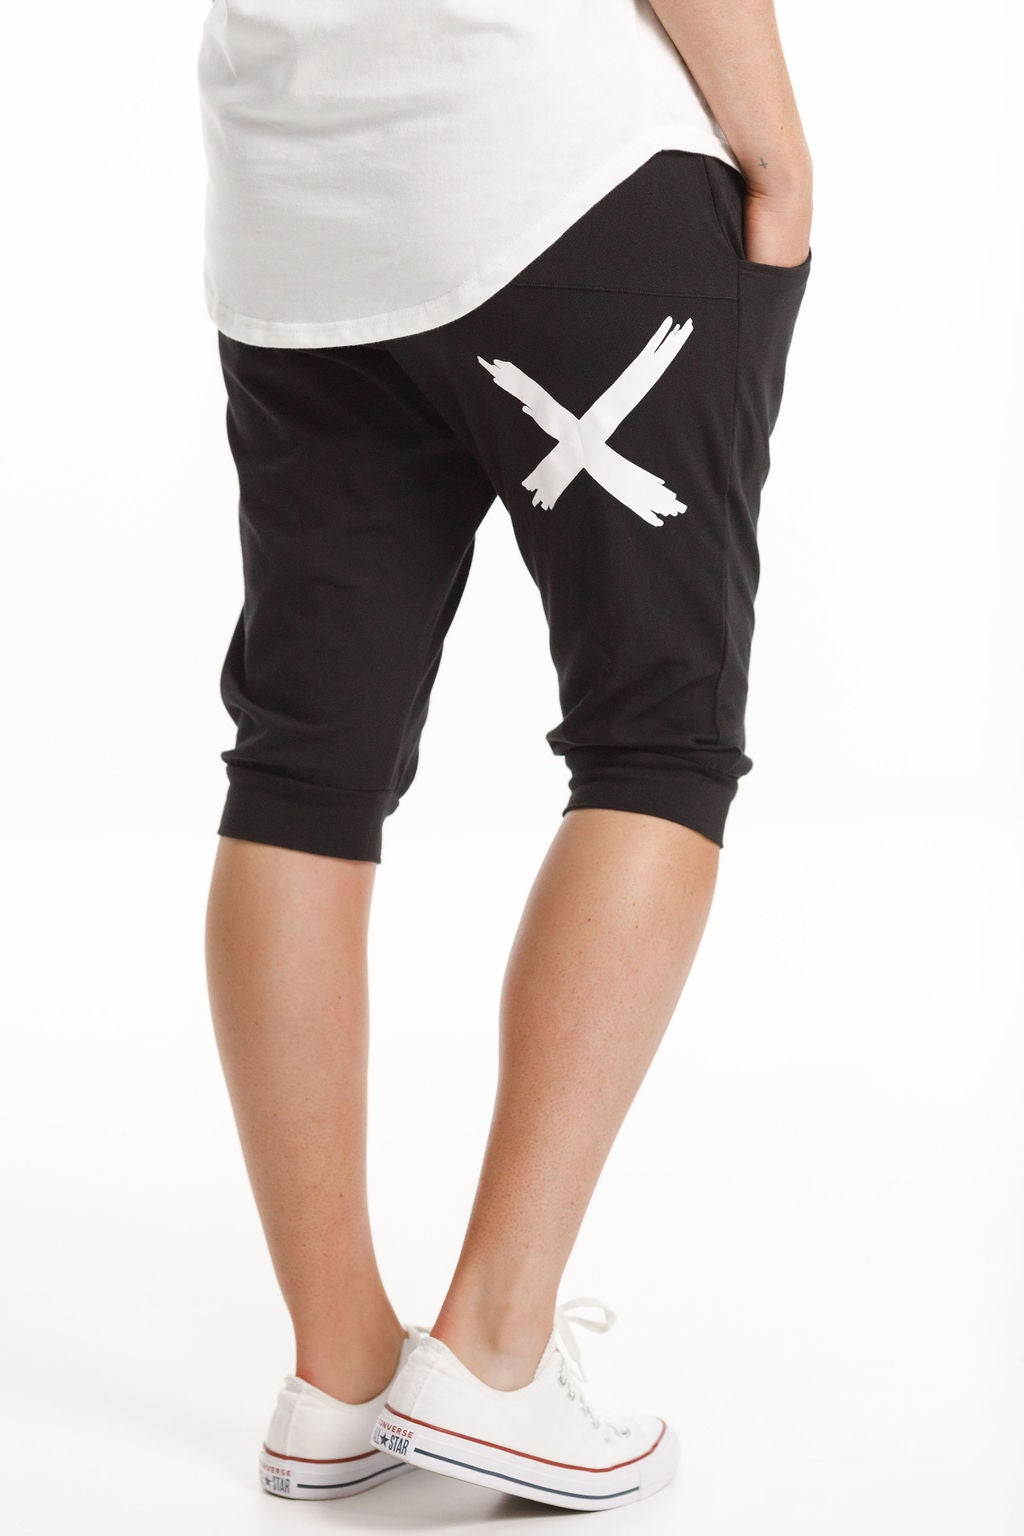 Homelee 3/4 Apartment Pants - Black with White X